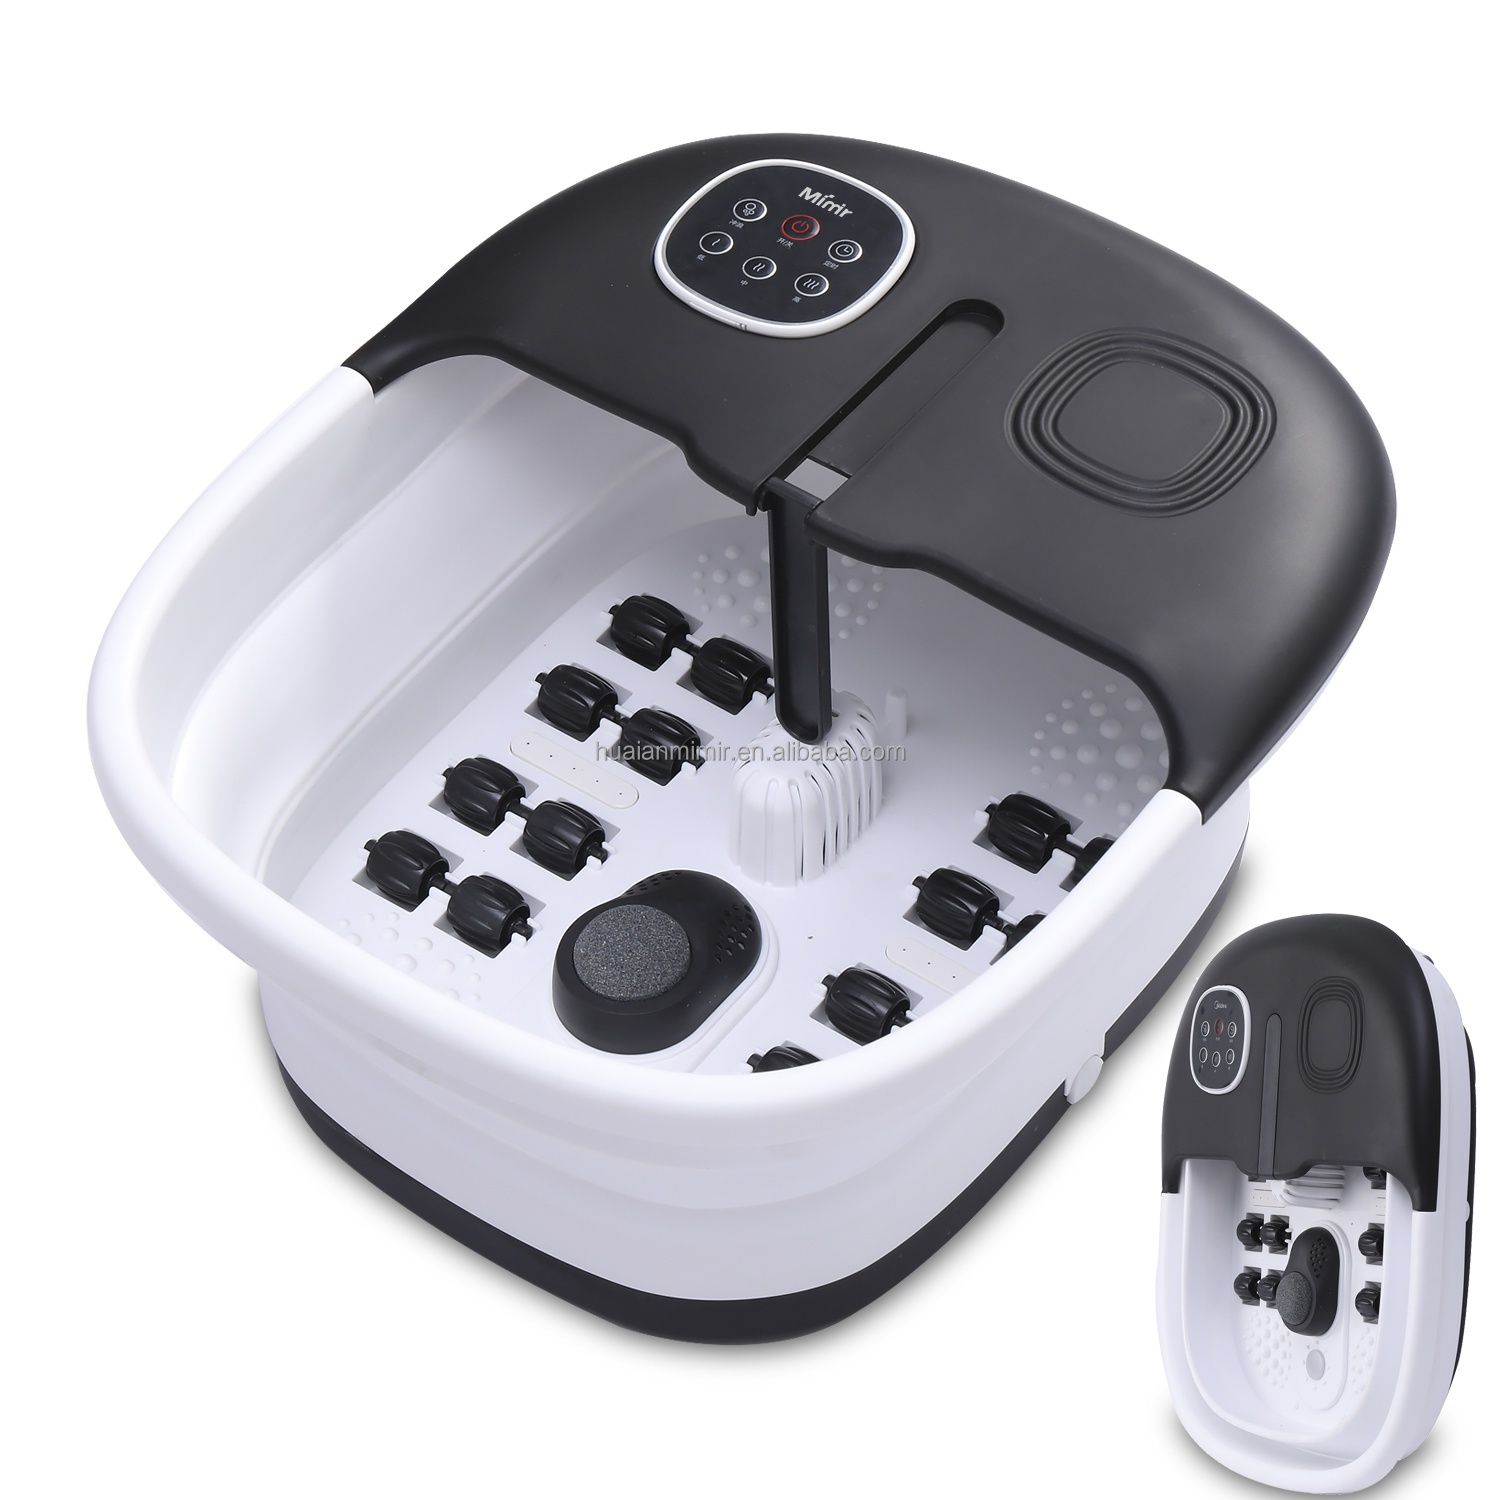 Functions of foot spa machine